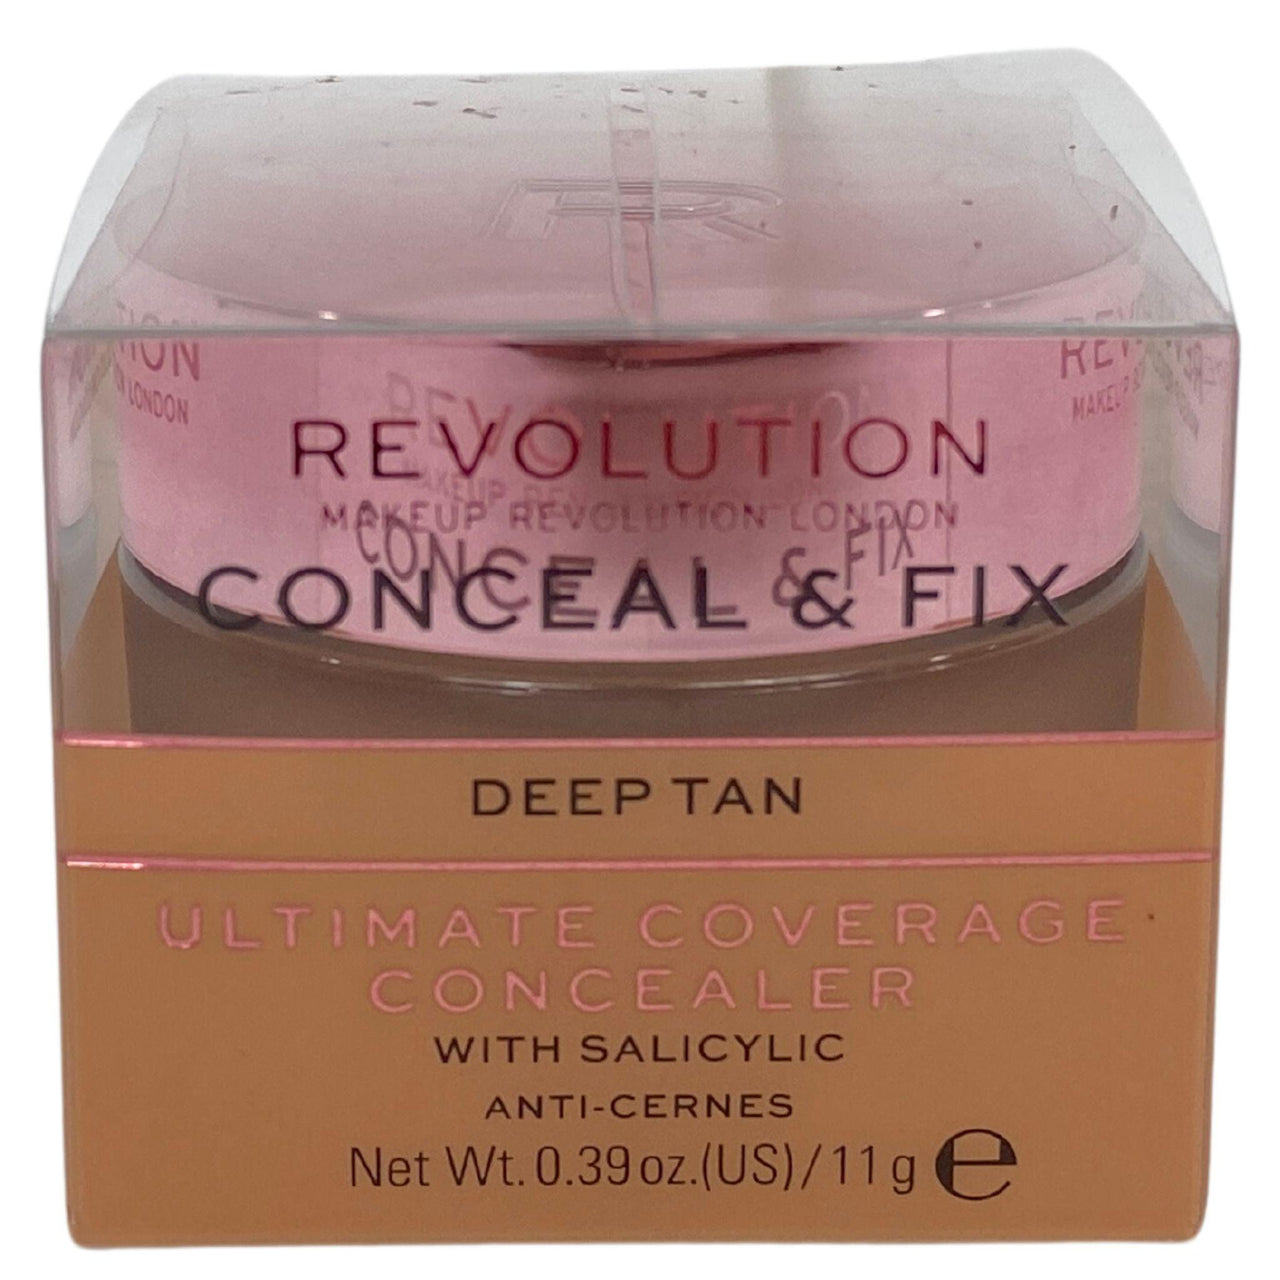 Revolution Conceal & Fix Ultimate Coverage Concealer with Salicylic Anti-Cernes (72 Pcs Lot) - Discount Wholesalers Inc